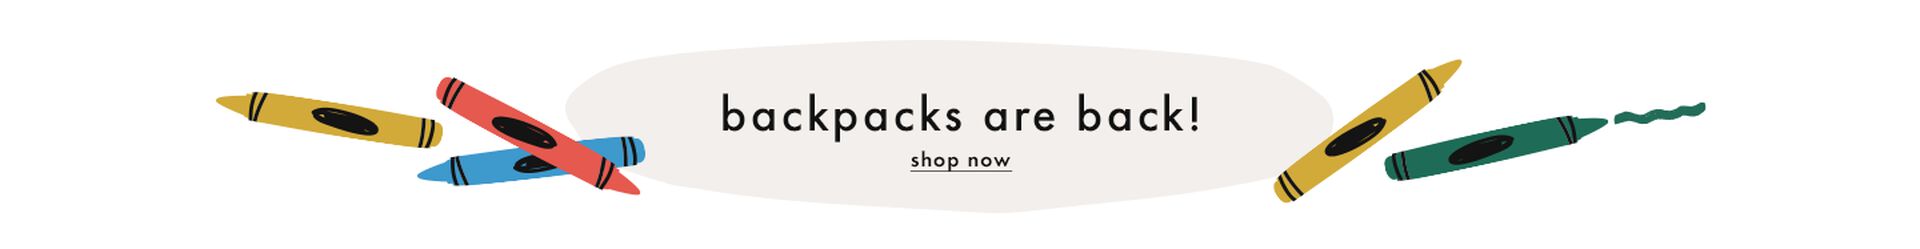 Backpacks are back!. shop now.